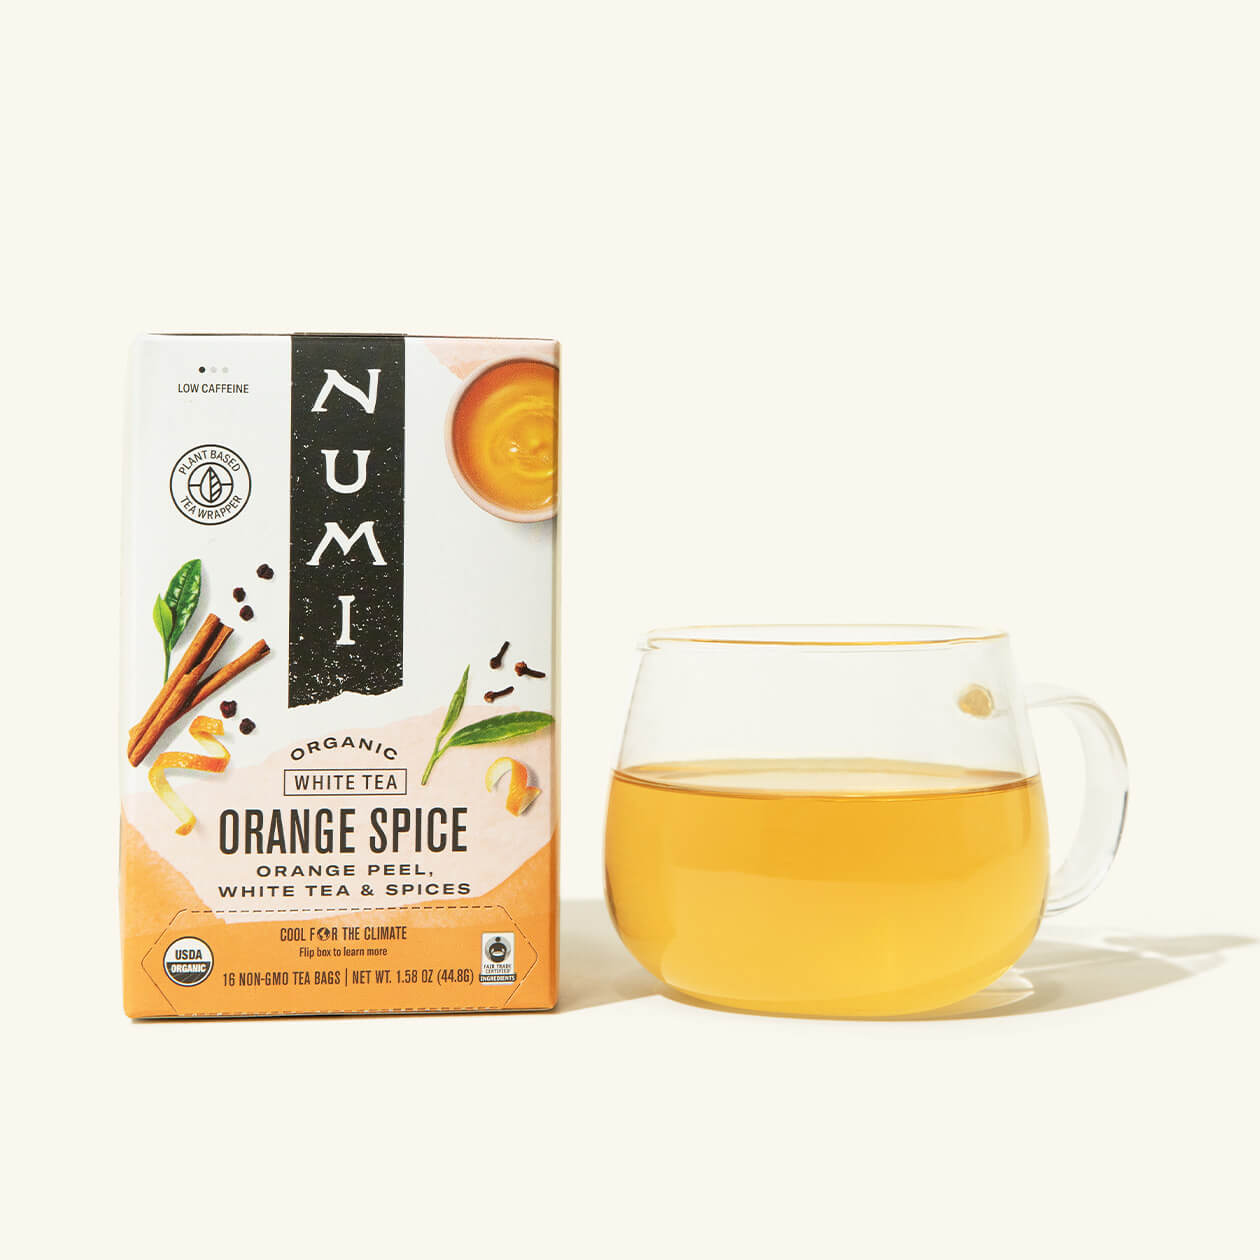 A box of Numi's Orange Spice next to a brewed cup of tea in a clear cup